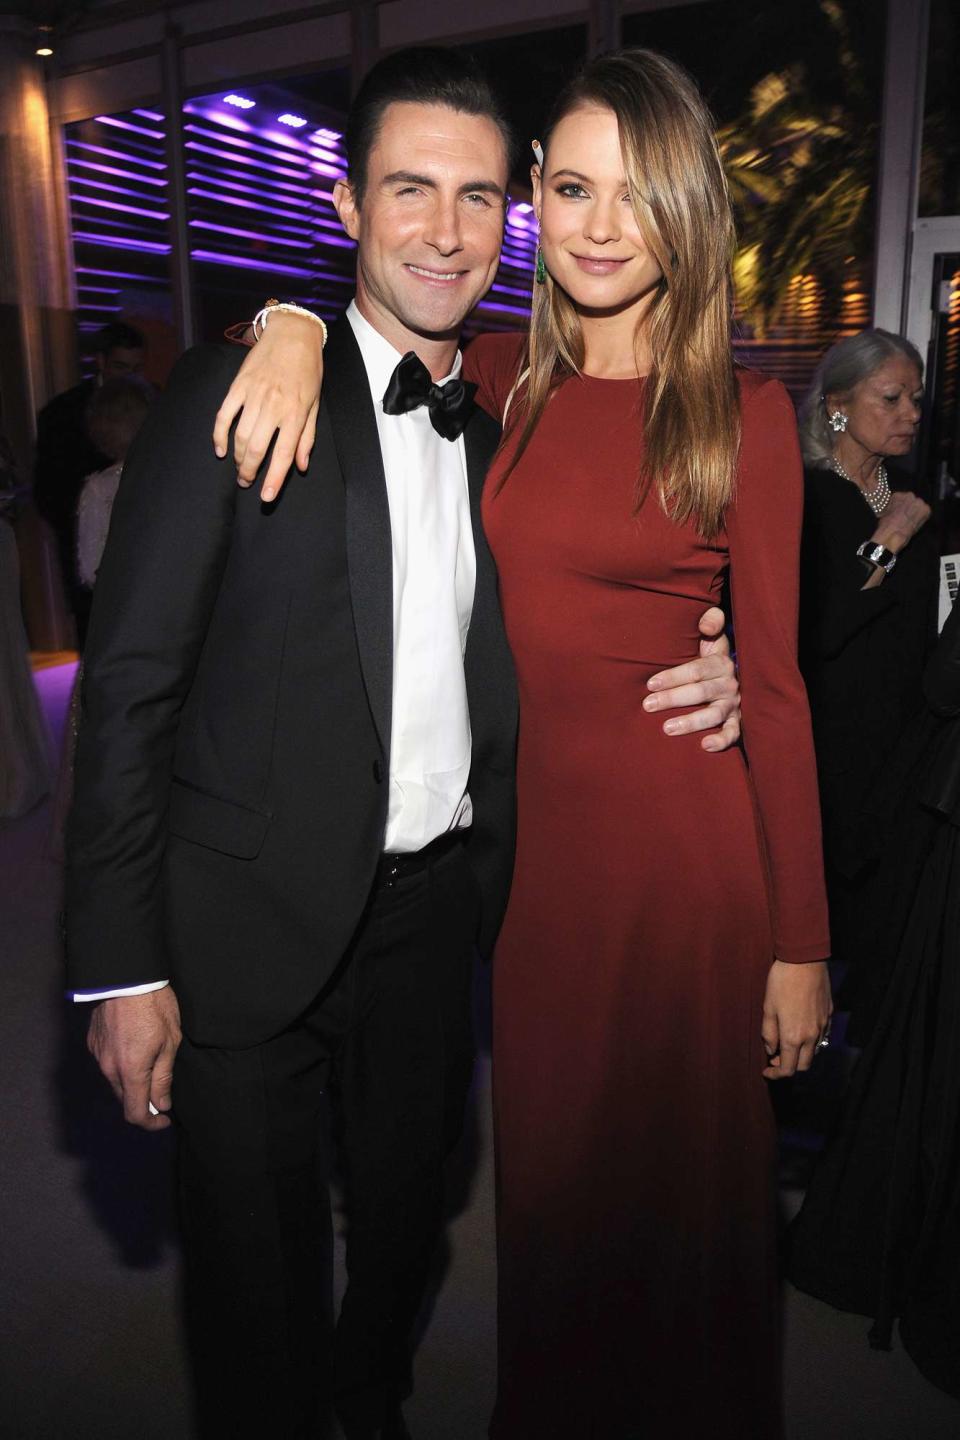 Behati Prinsloo and Adam Levine attend the 2014 Vanity Fair Oscar Party Hosted By Graydon Carter on March 2, 2014 in West Hollywood, California